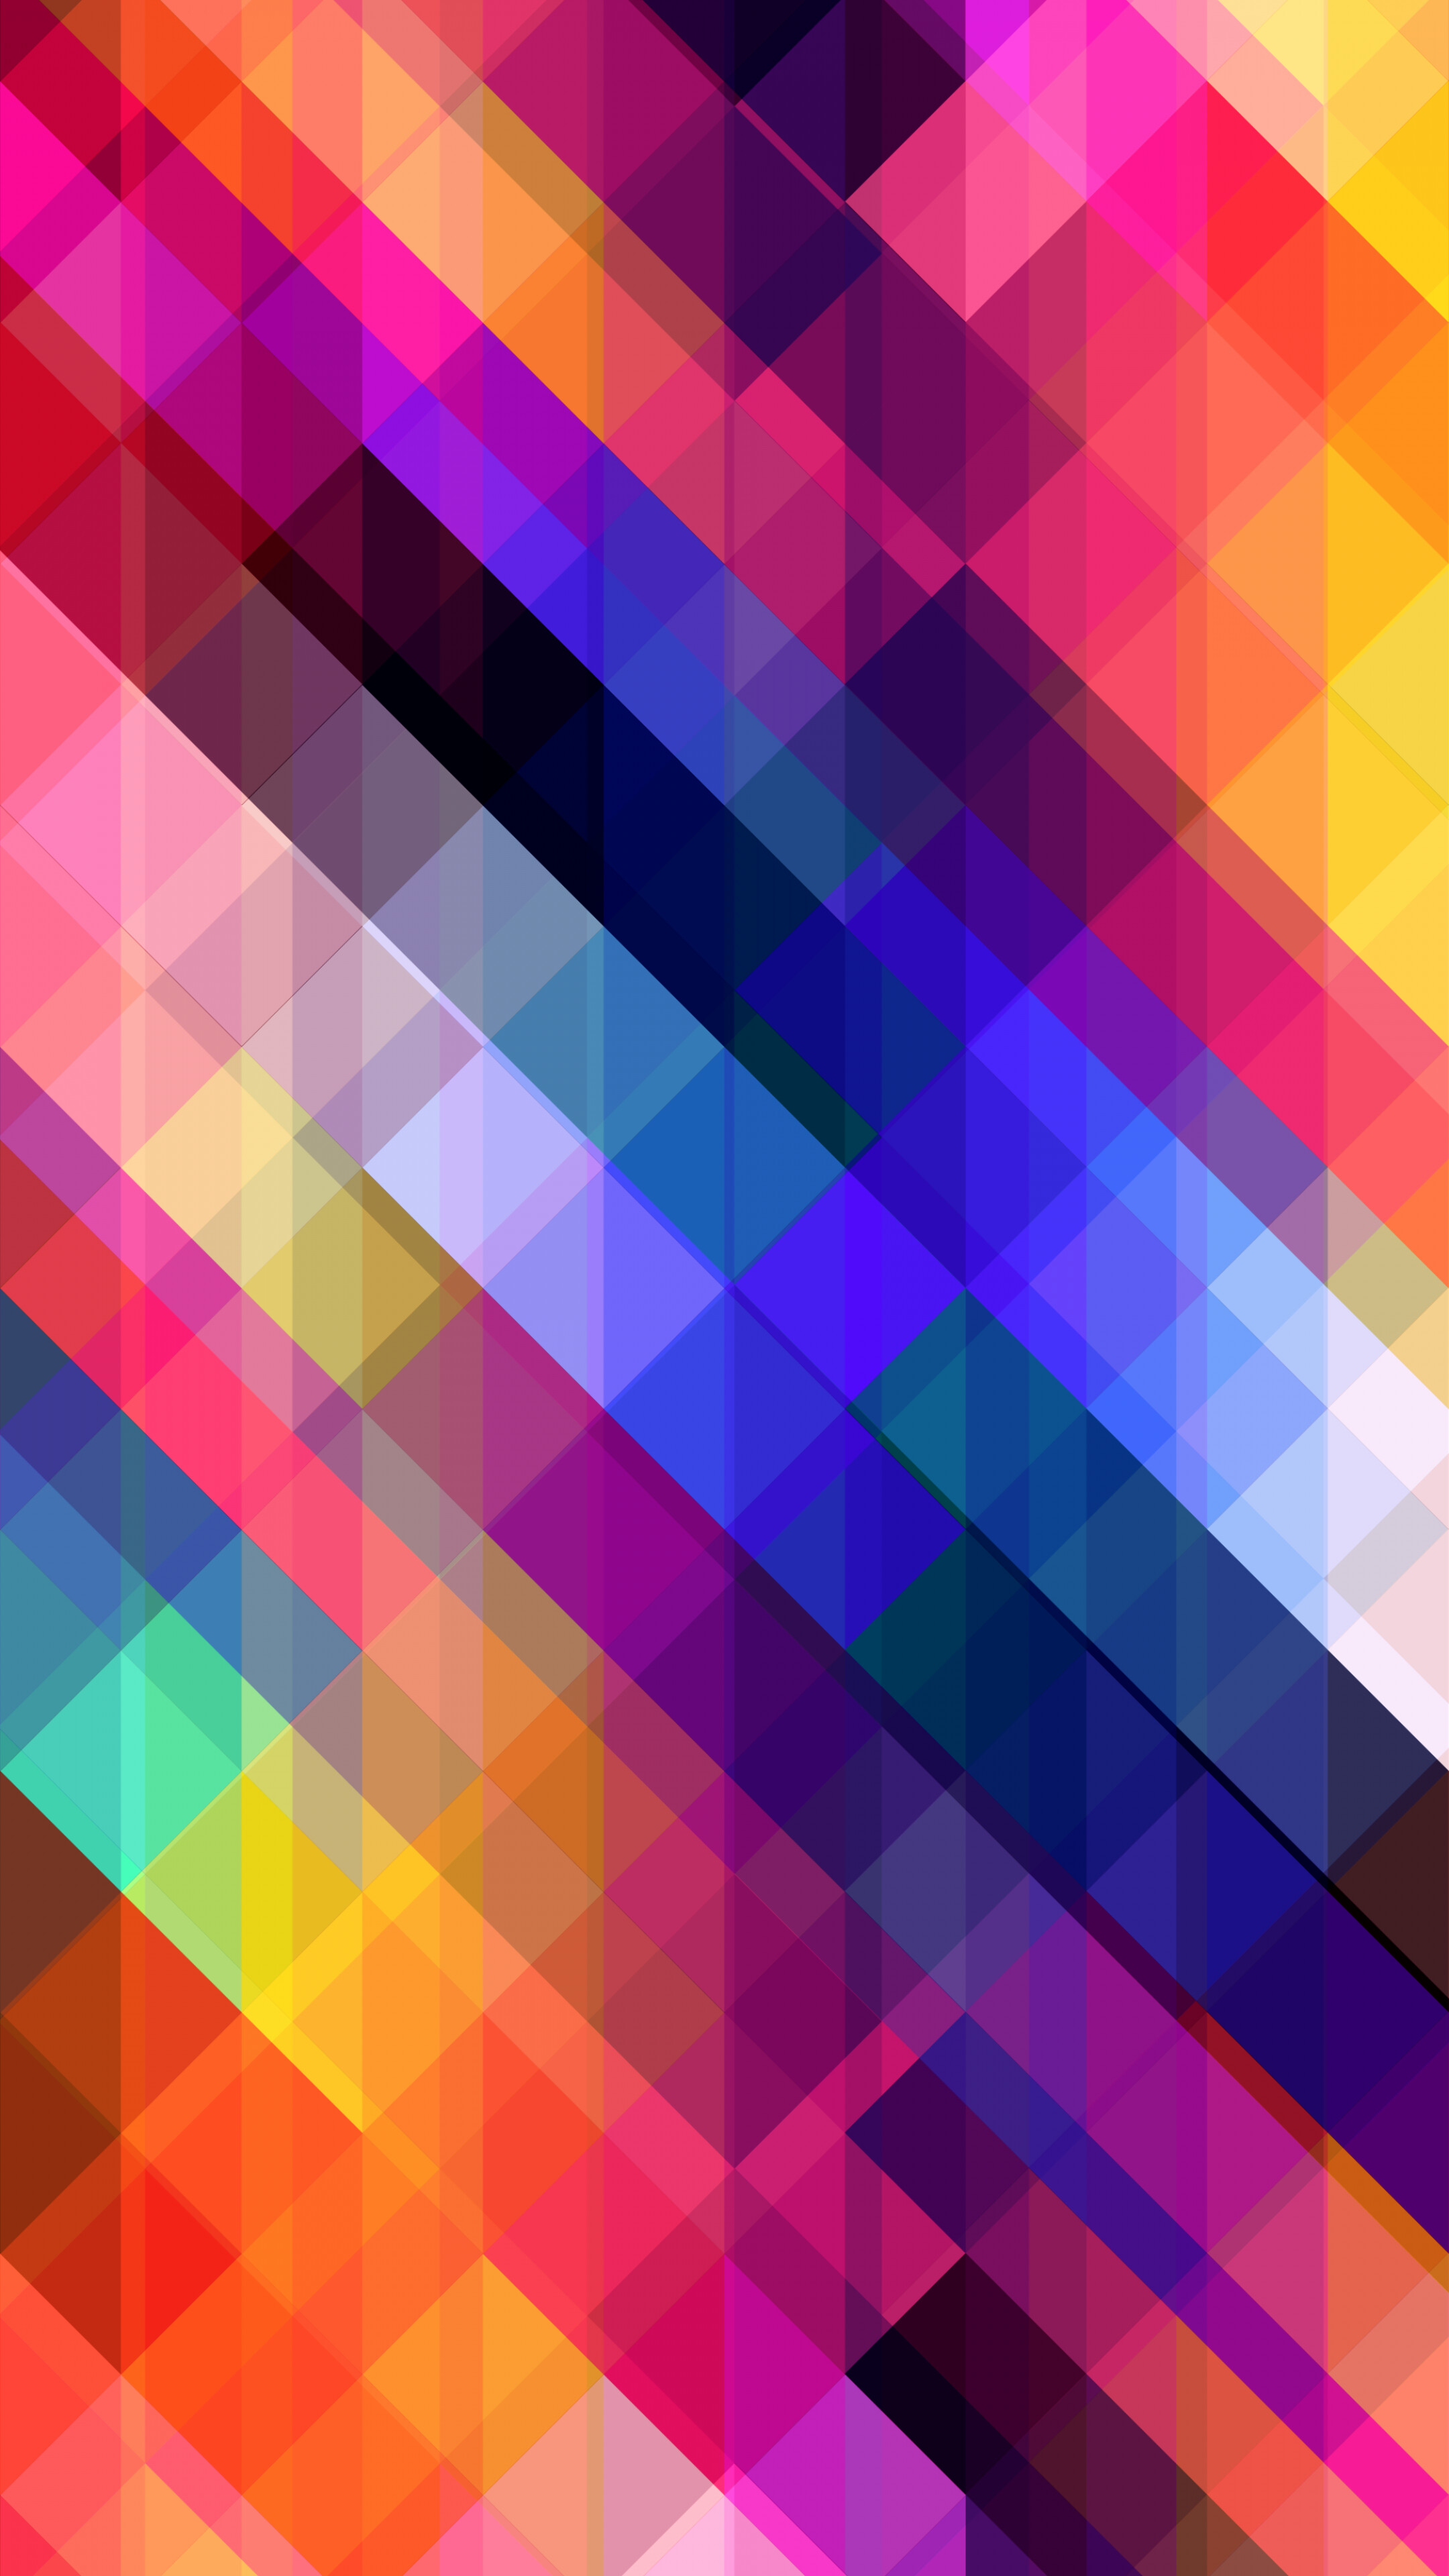 Geometry: Vibrant colors, Triangles, Squares, Obtuse angles. 2160x3840 4K Wallpaper.